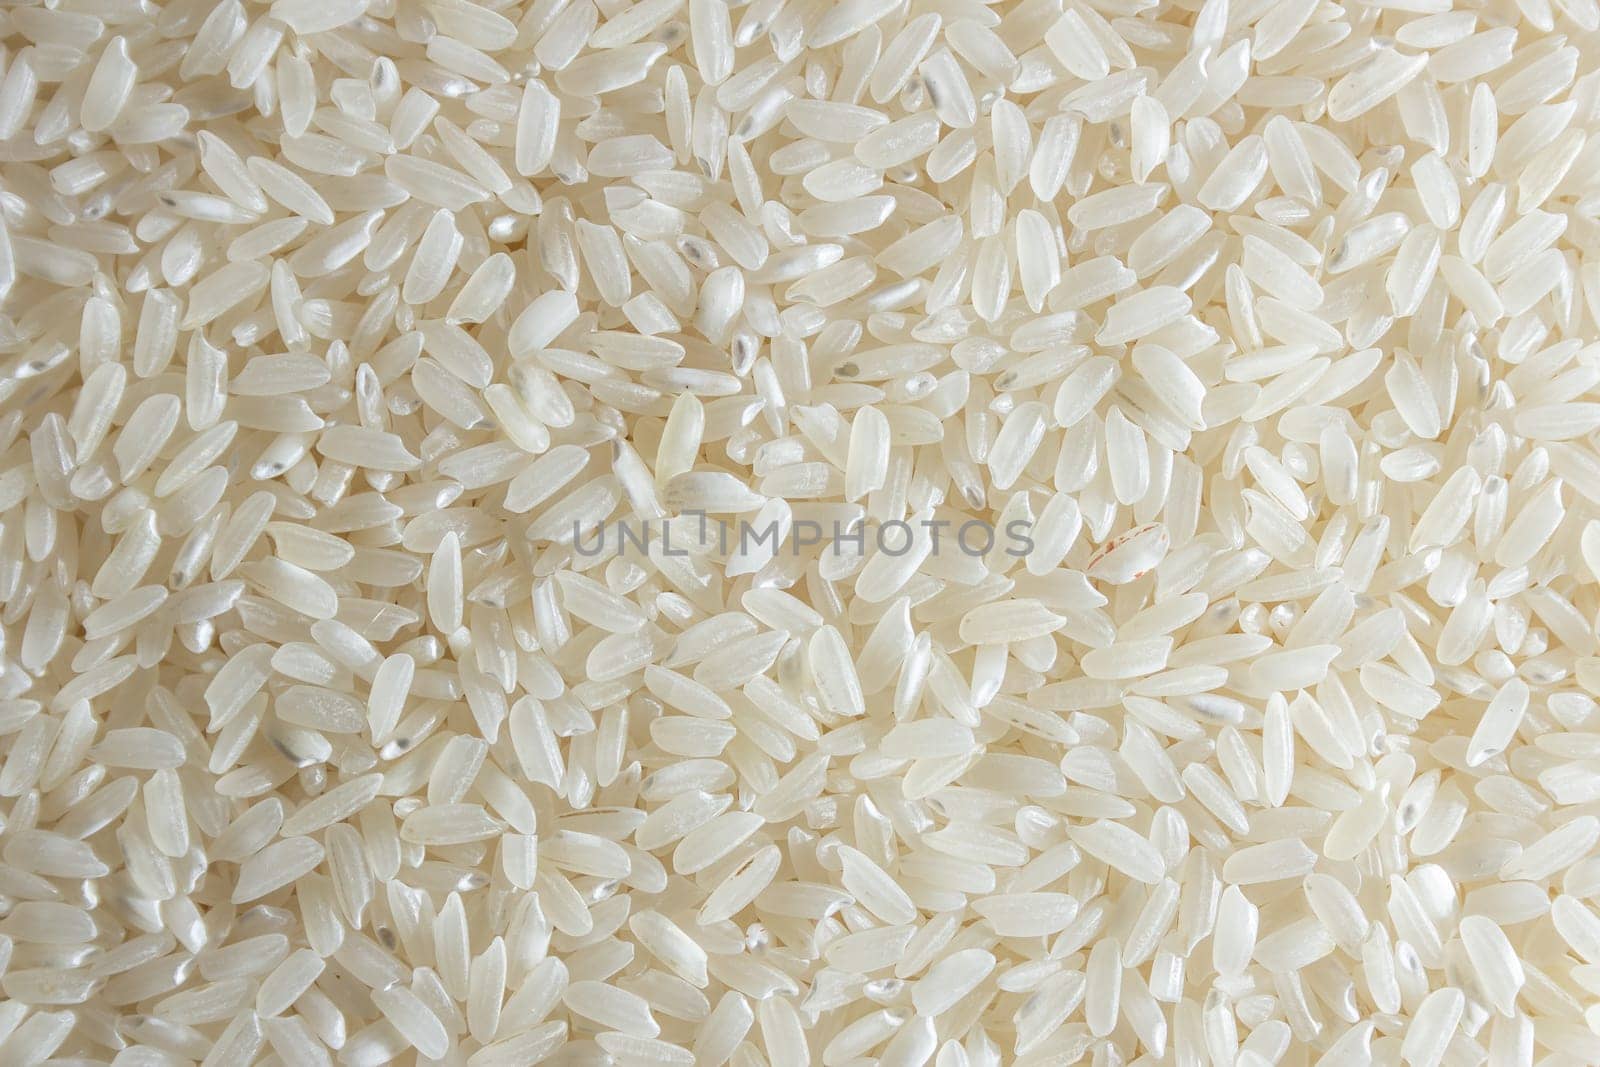 Dry Uncooked White Rice Background by InfinitumProdux